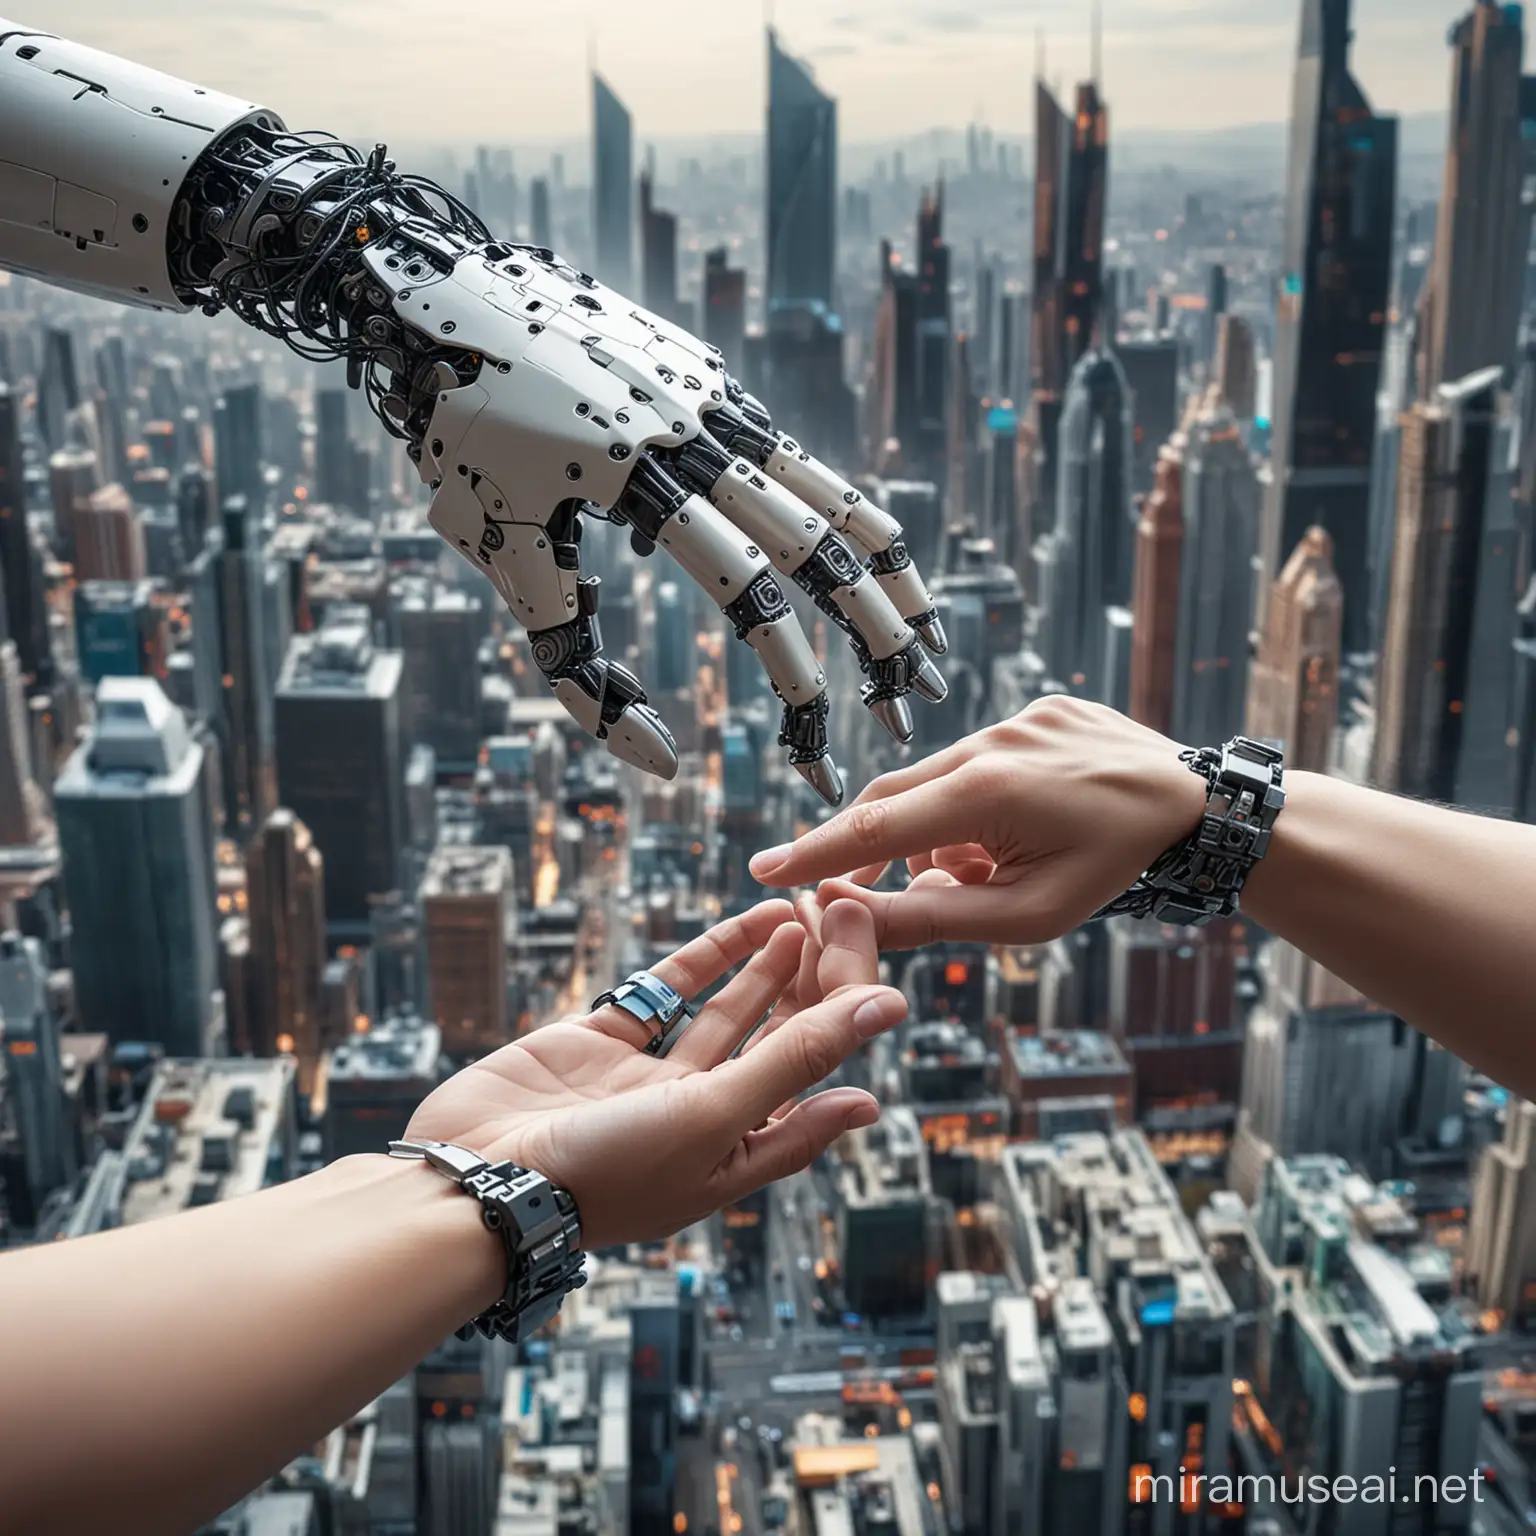 Futuristic HumanRobot Interaction Touching Hands in Cityscape